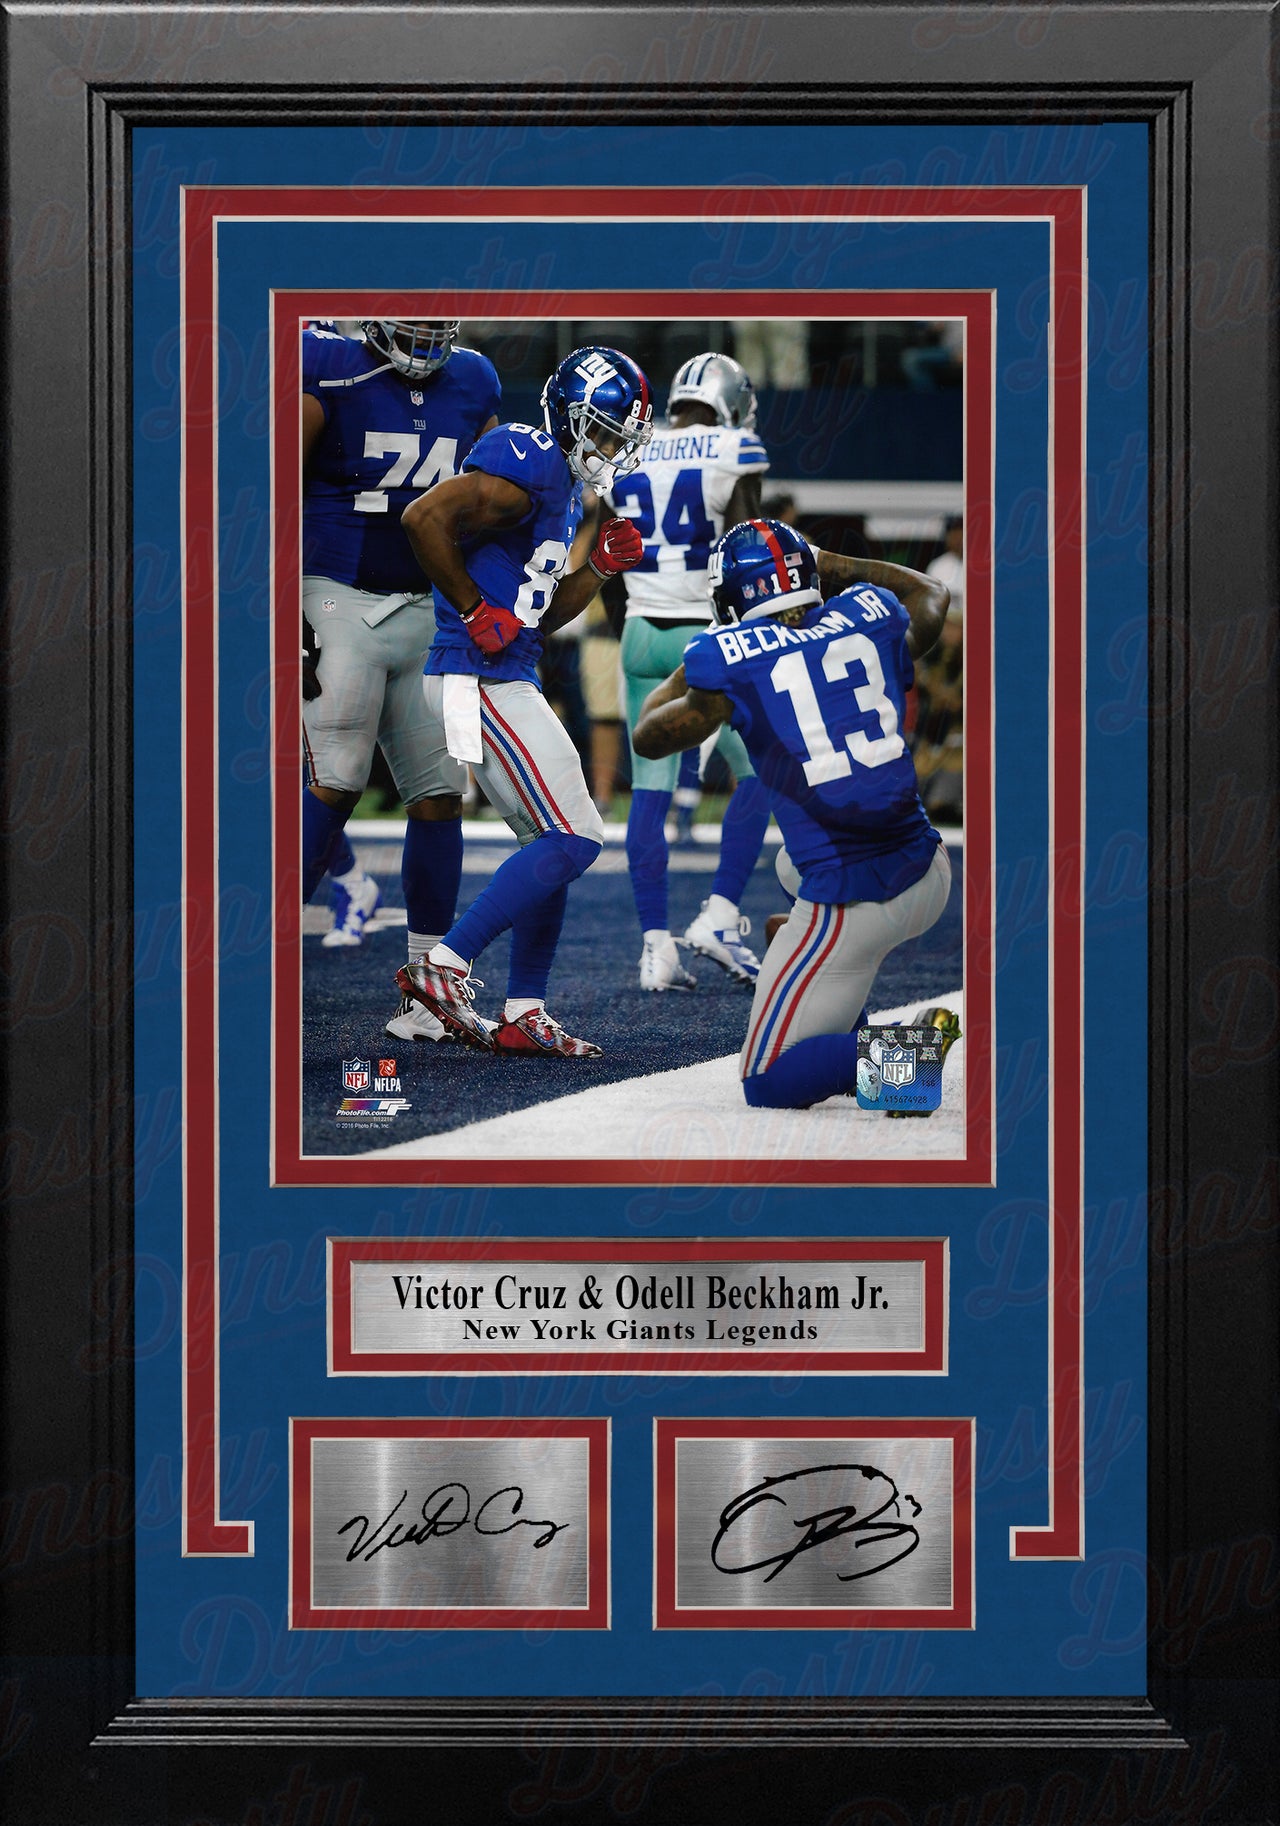 Victor Cruz & Odell Beckham New York Giants 8" x 10" Framed Football Photo with Engraved Autographs - Dynasty Sports & Framing 